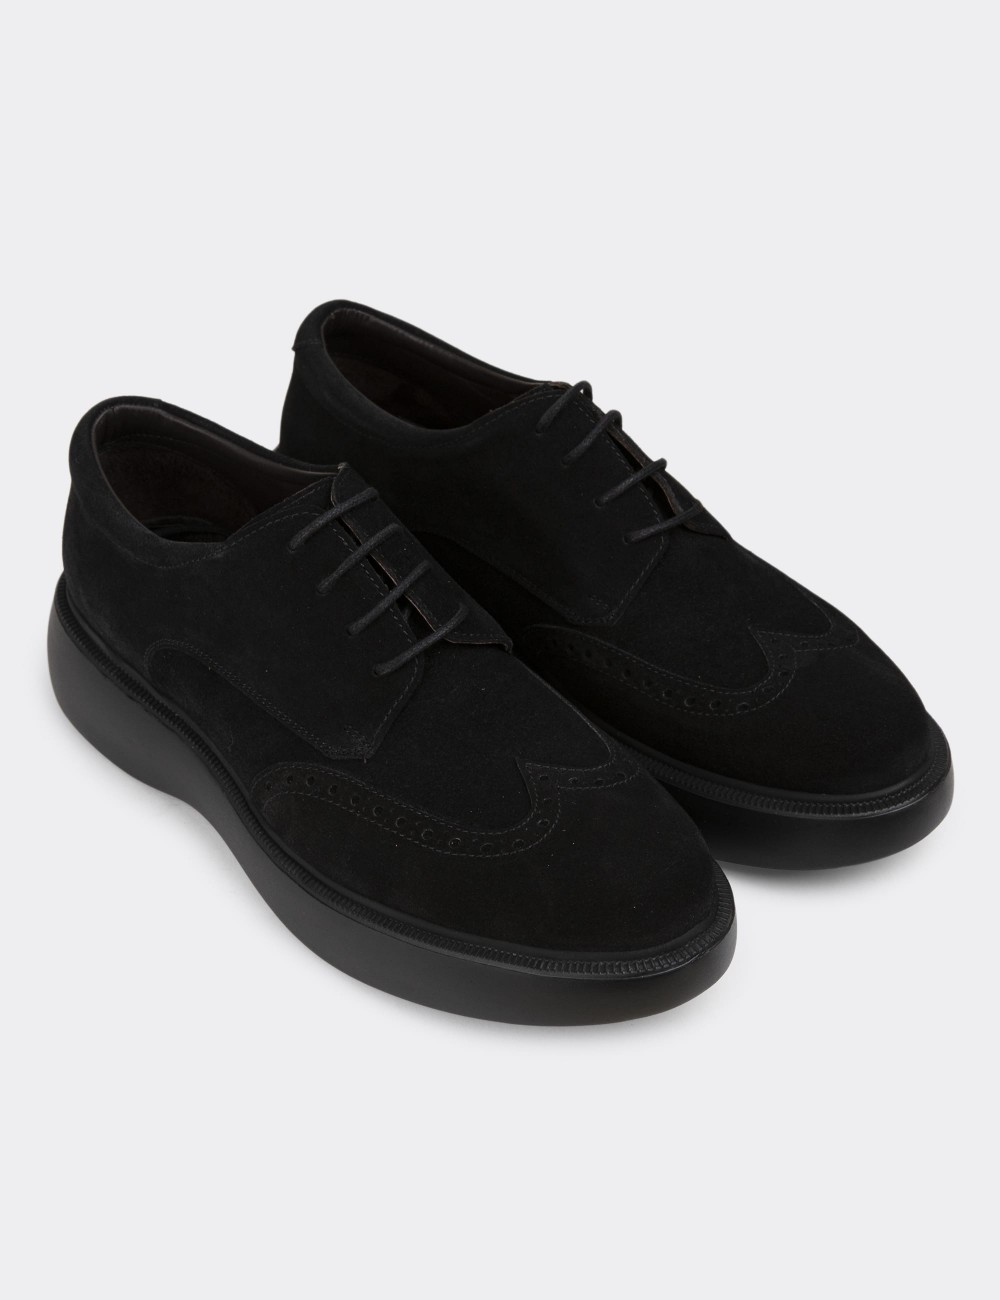 Black Suede Leather Lace-up Shoes - 01942MSYHE02